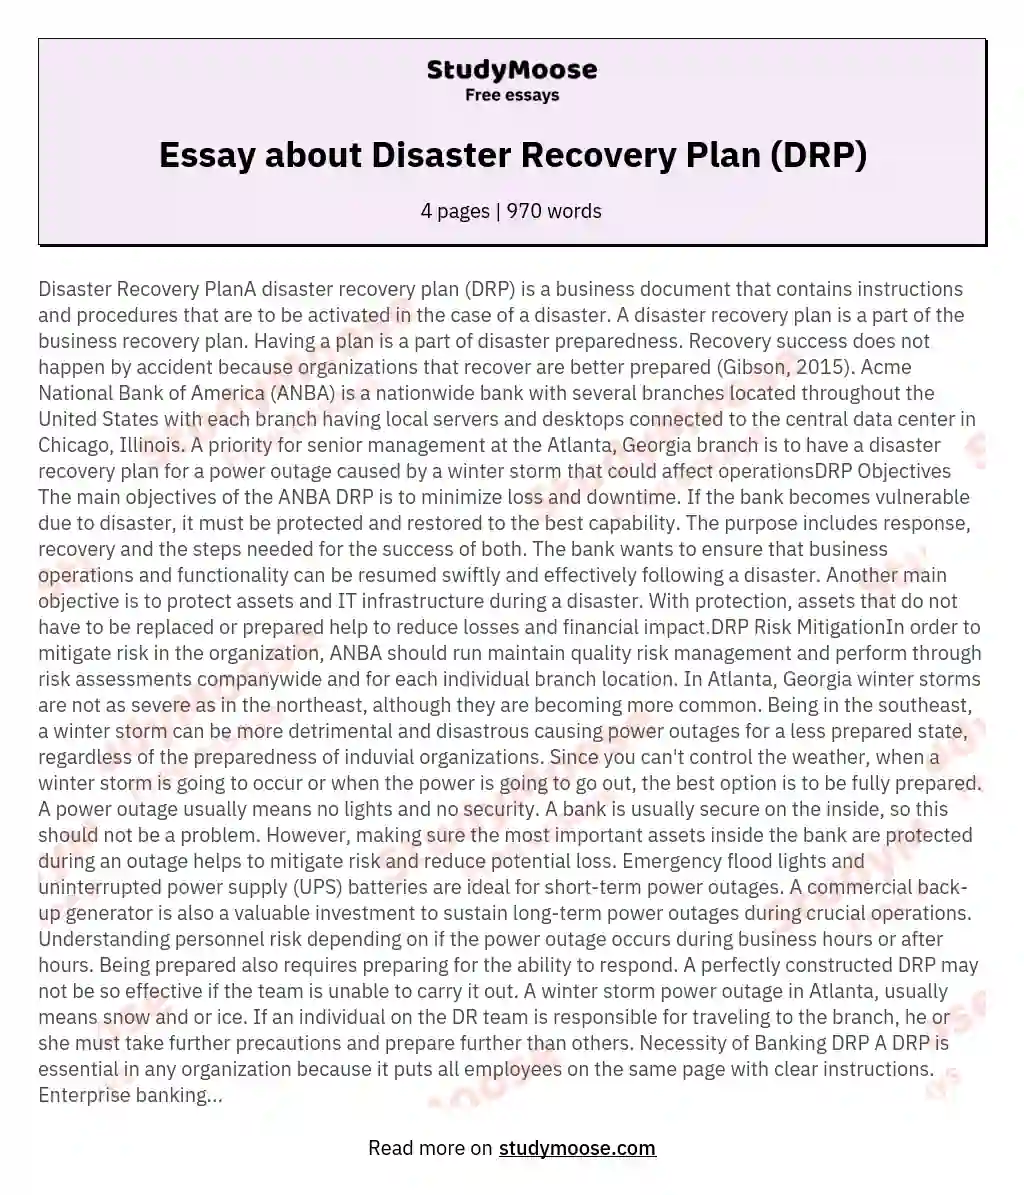 Essay about Disaster Recovery Plan (DRP) essay